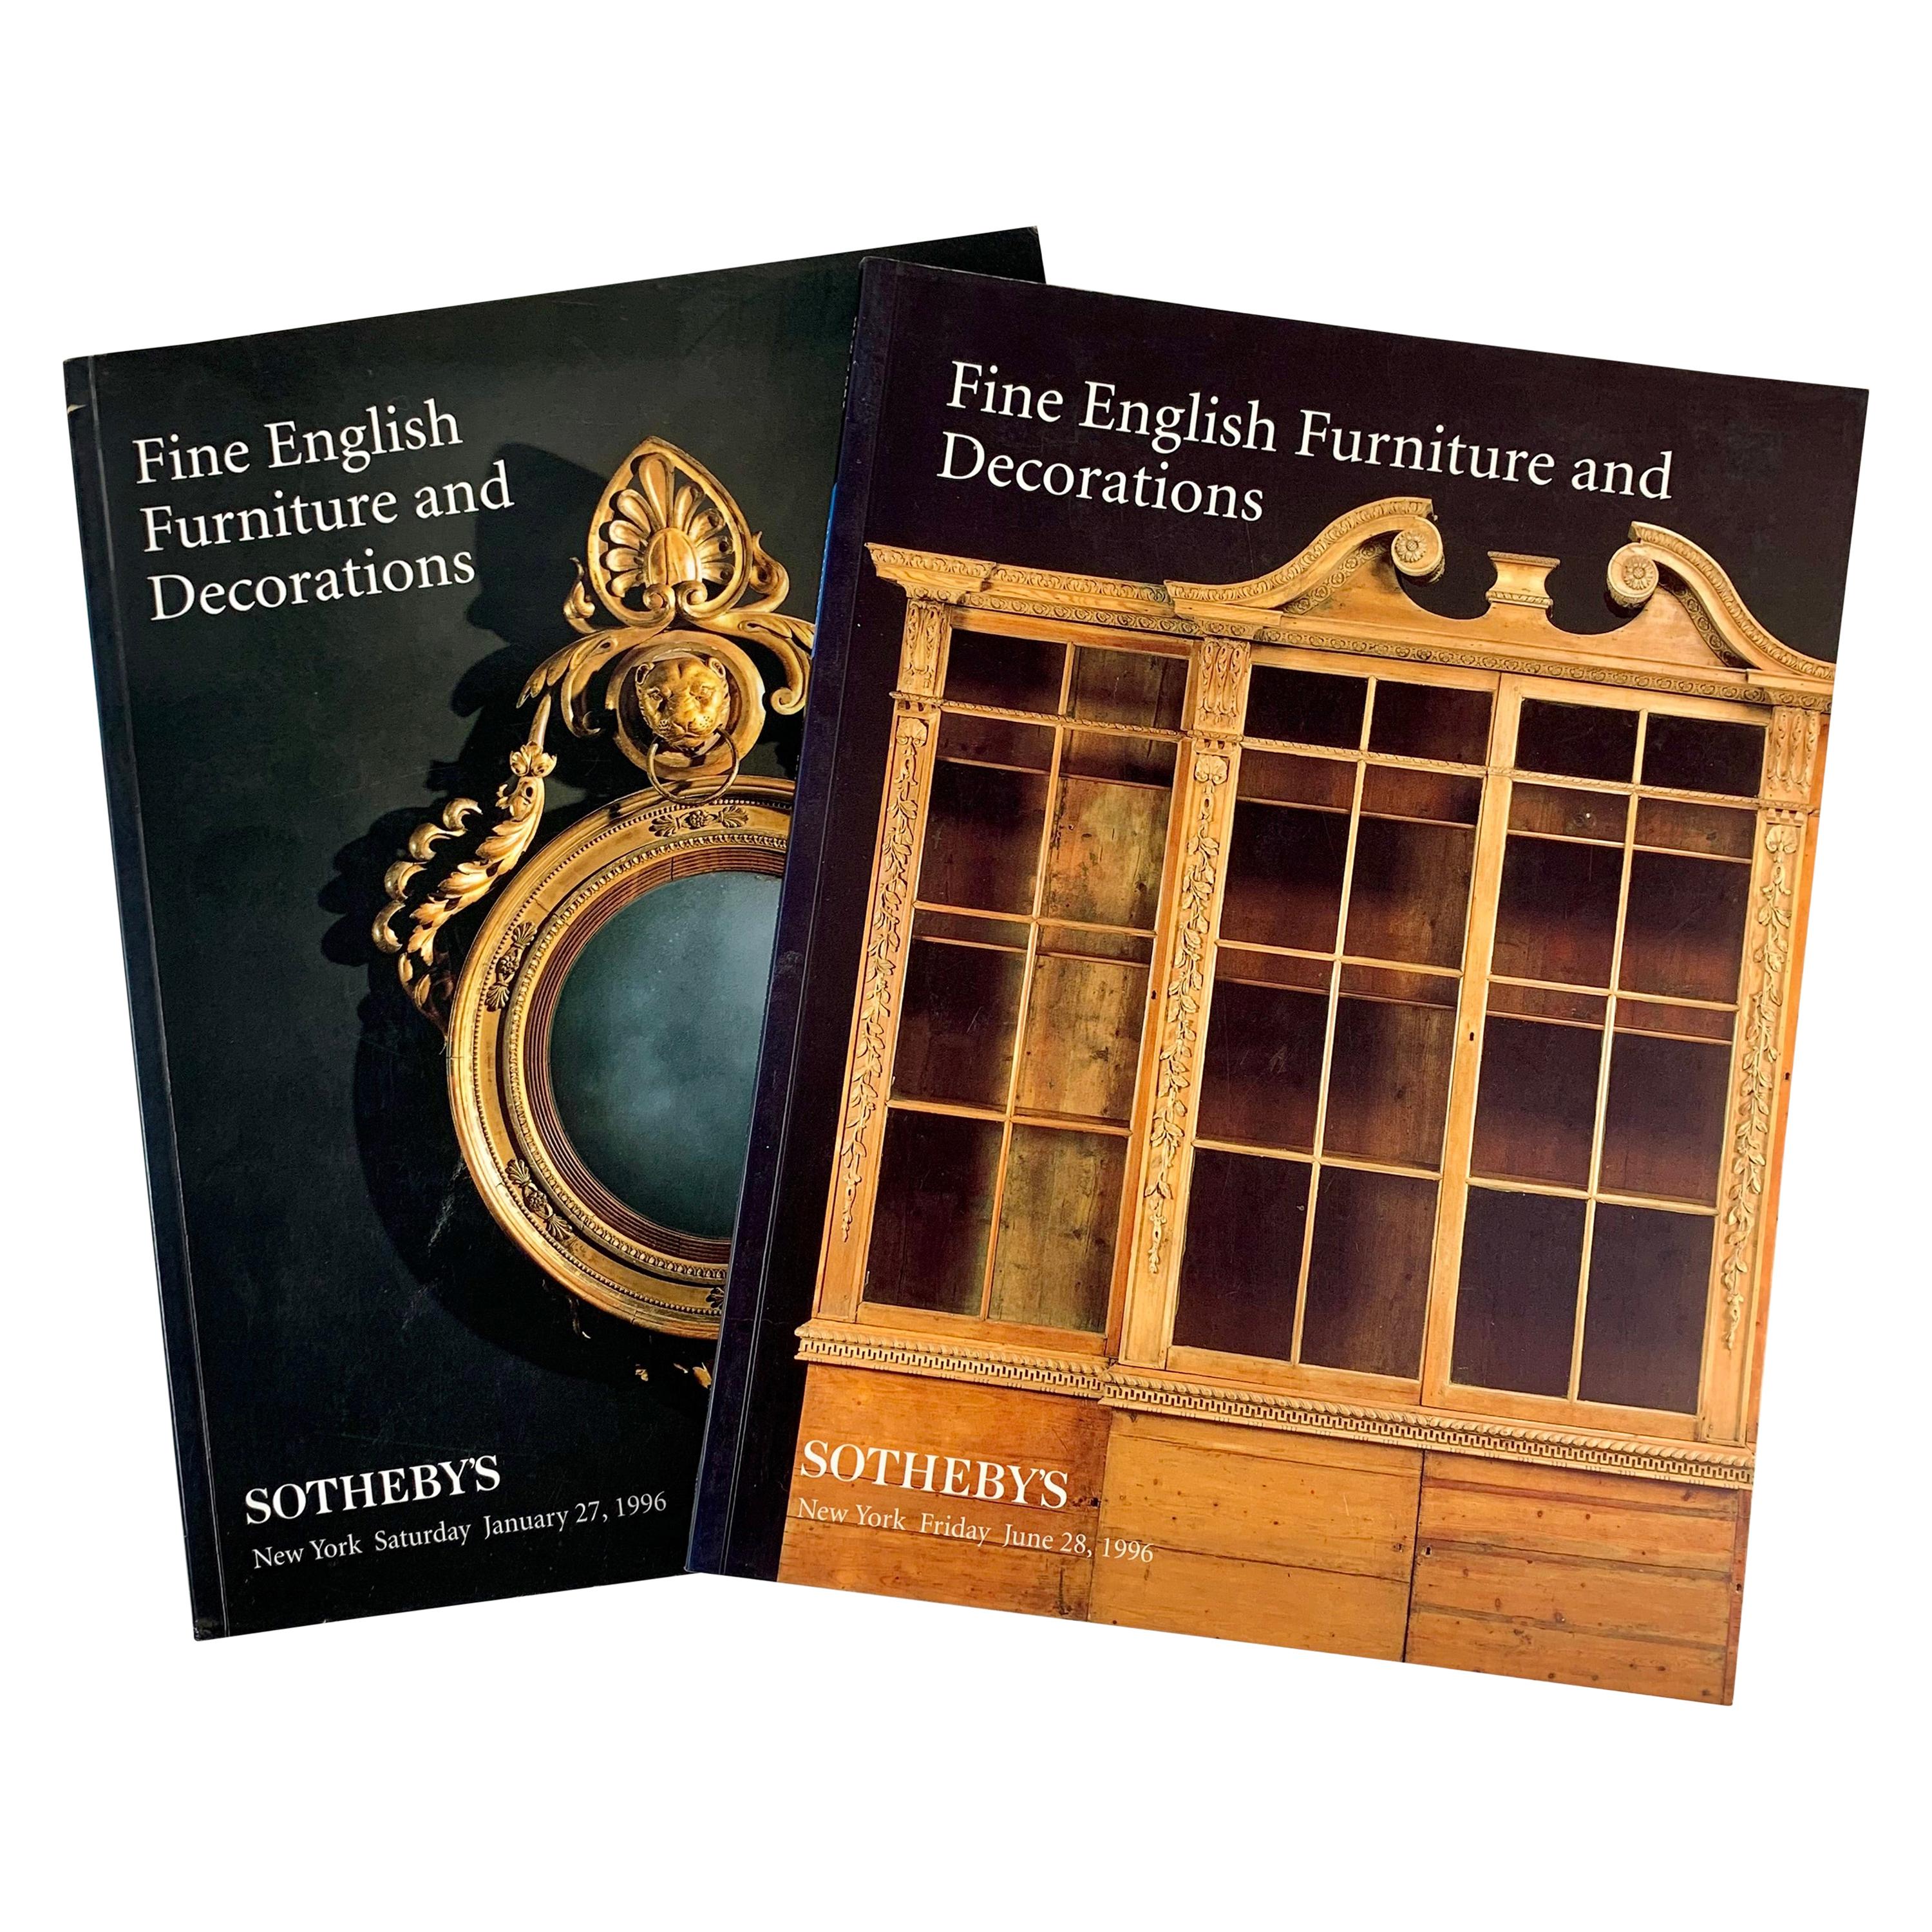 Sotheby's NY Auction Catalogues, Fine English Furniture & Decorations, Set of 2